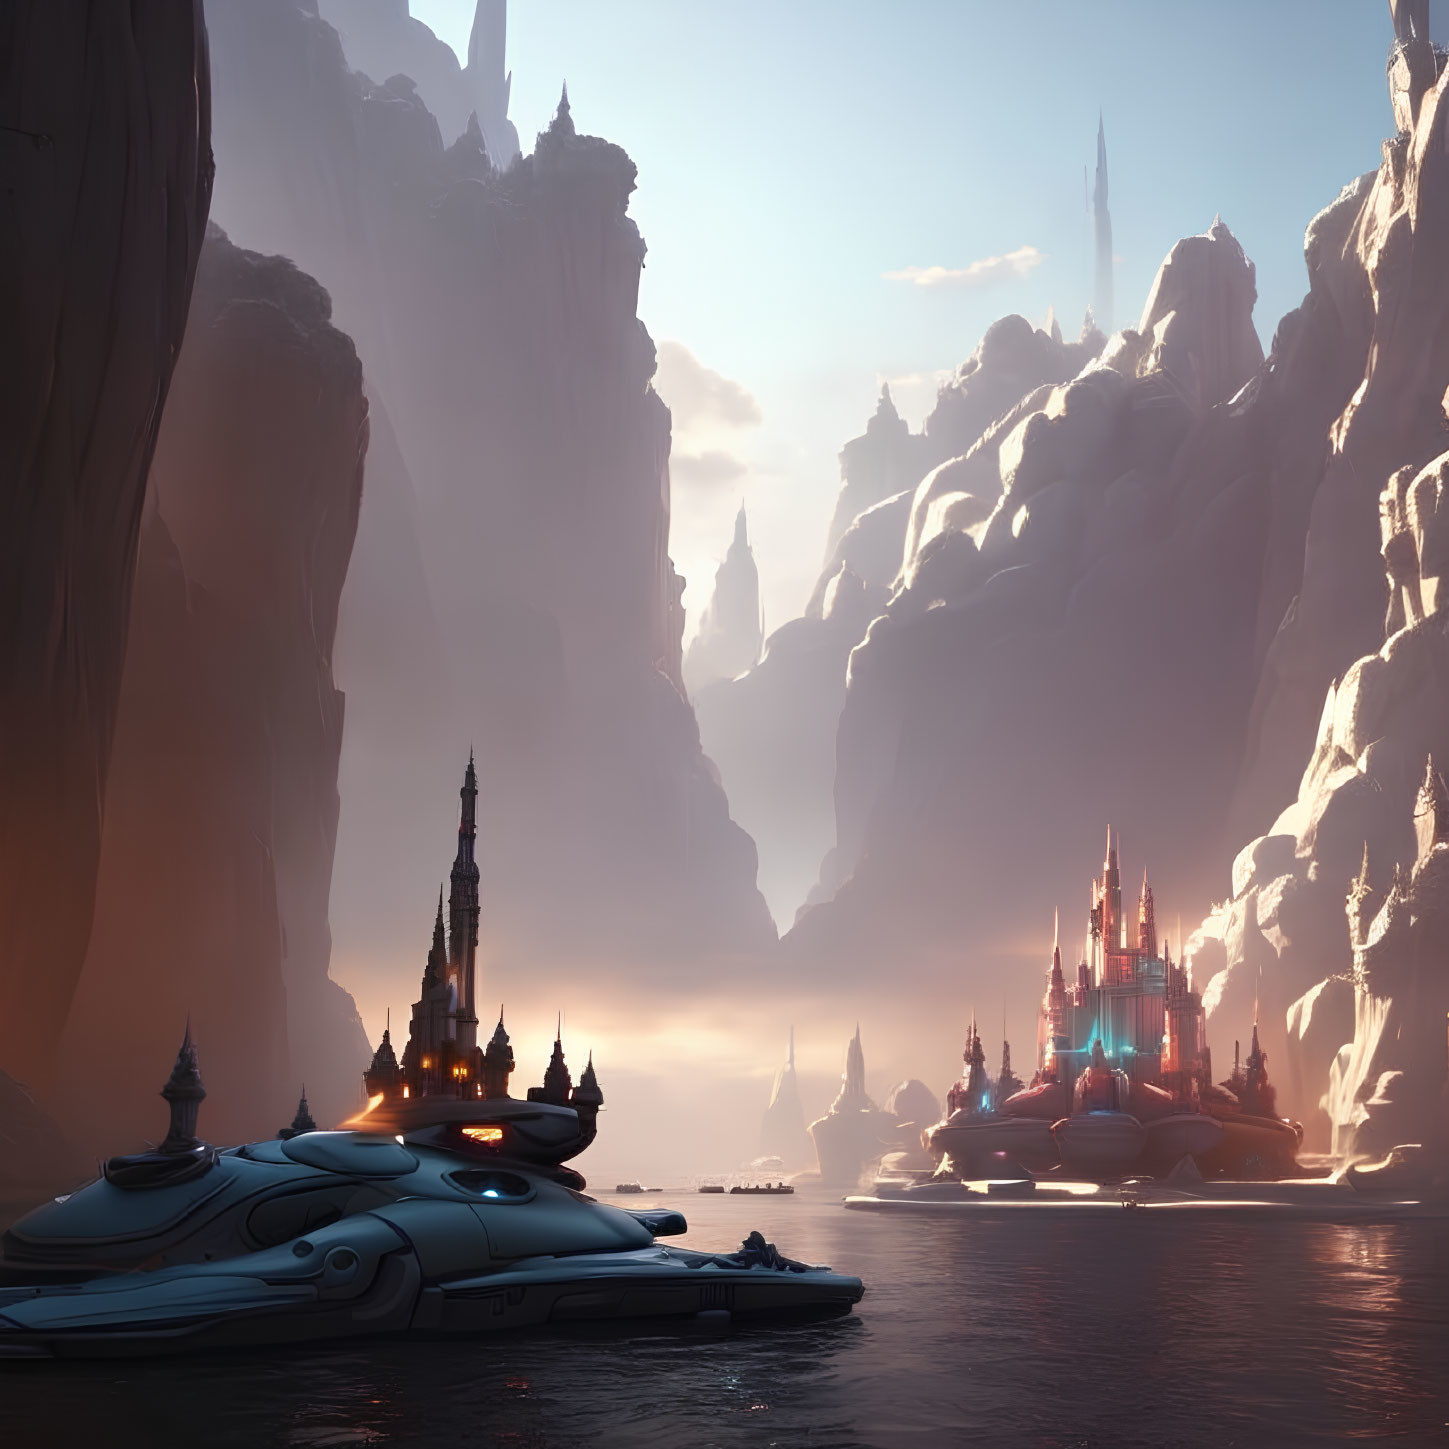 Futuristic landscape with towering rock formations and advanced structures